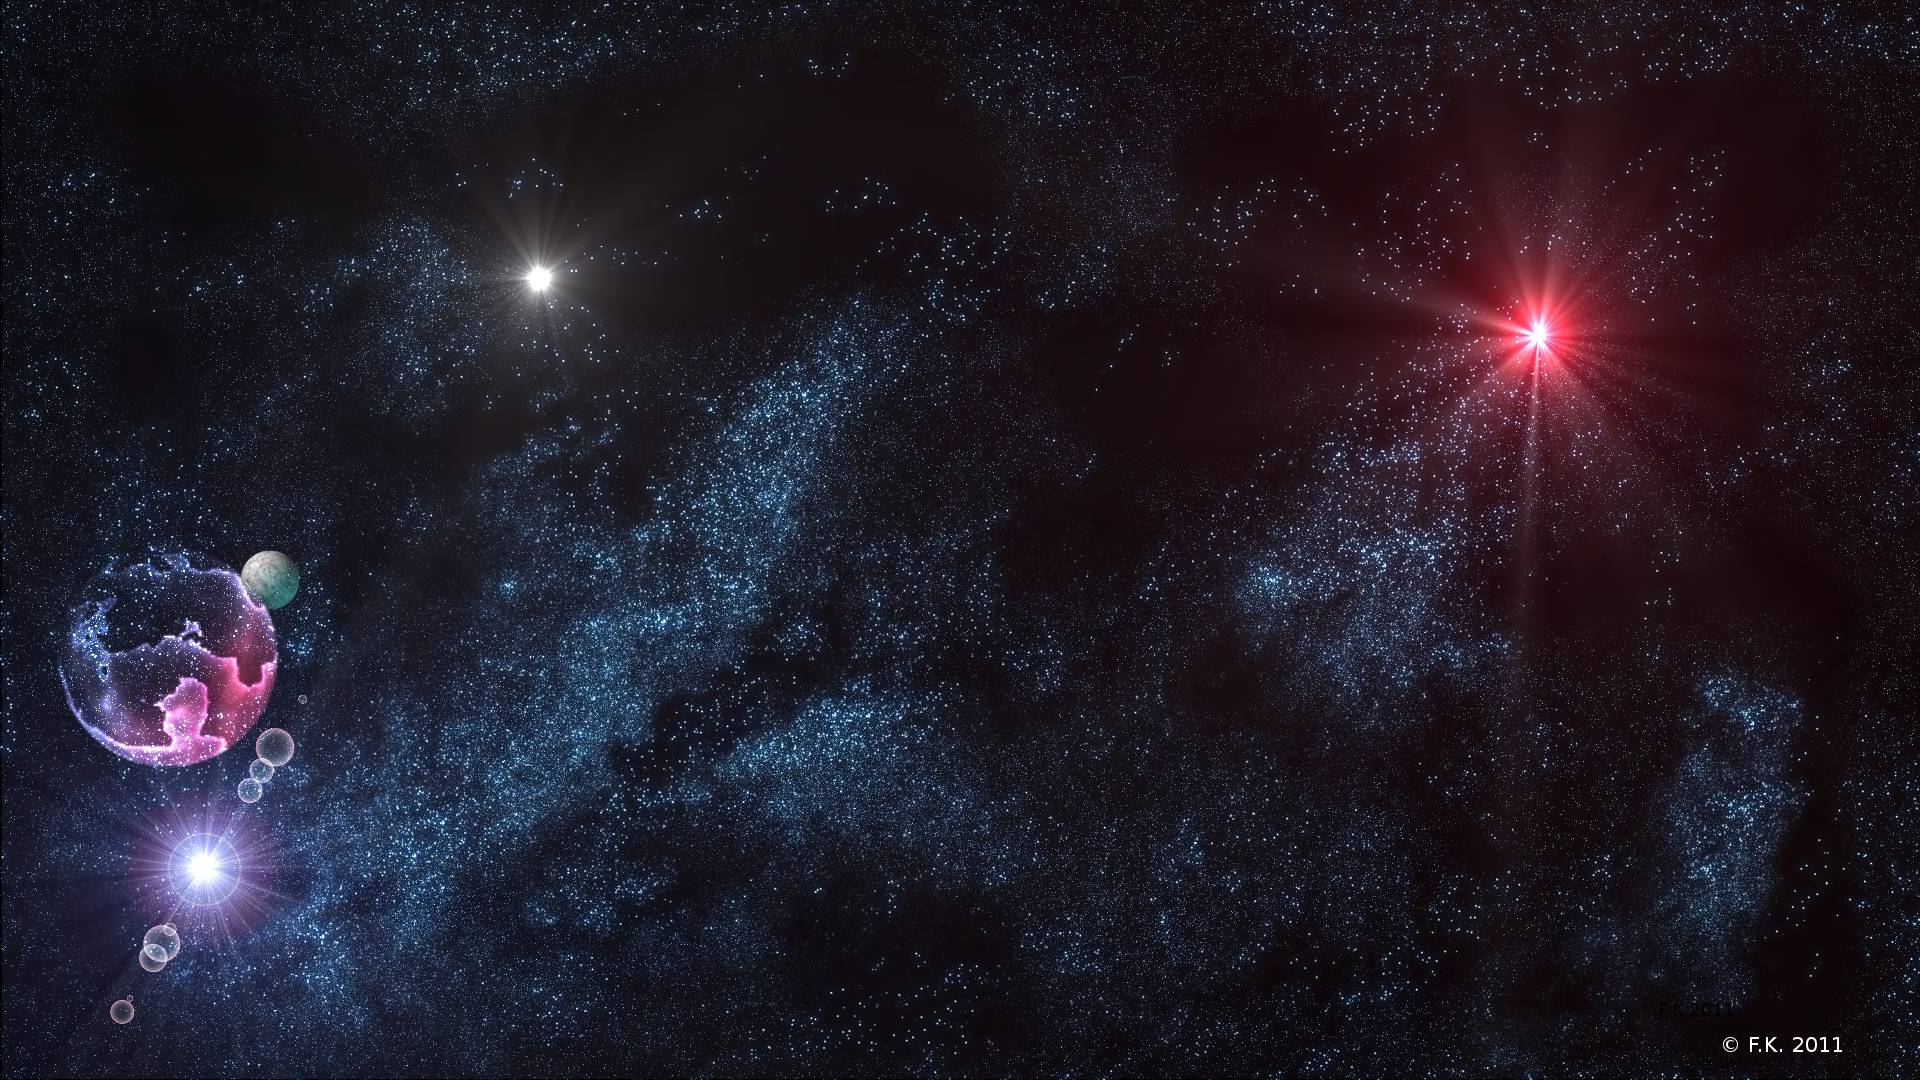 Universe Space 1080p Wallpapers HD Skilal : Skilal.Com